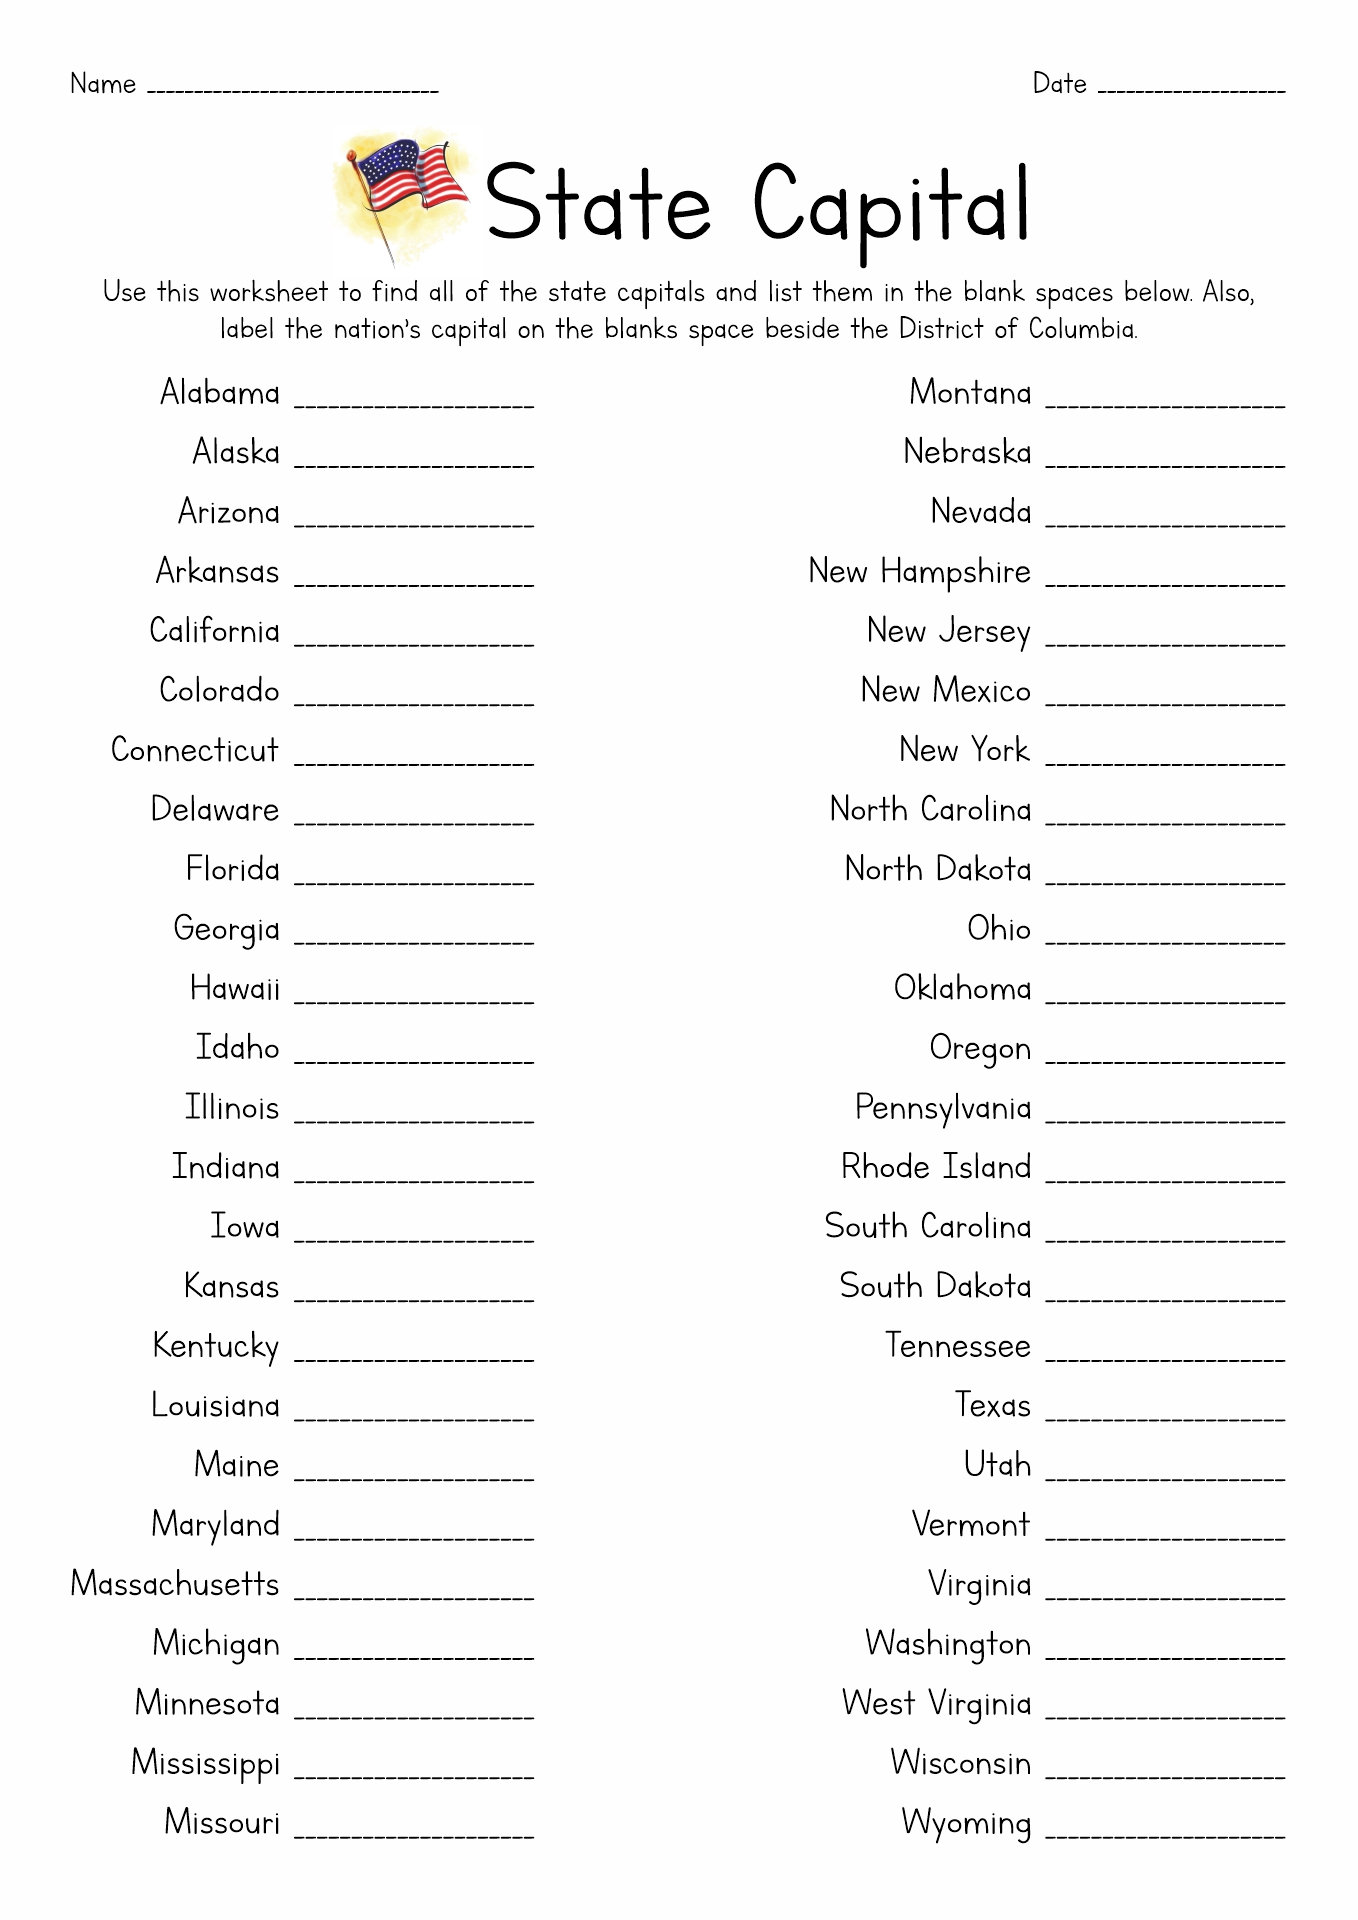 50 States and Capitals Printable Worksheet Image